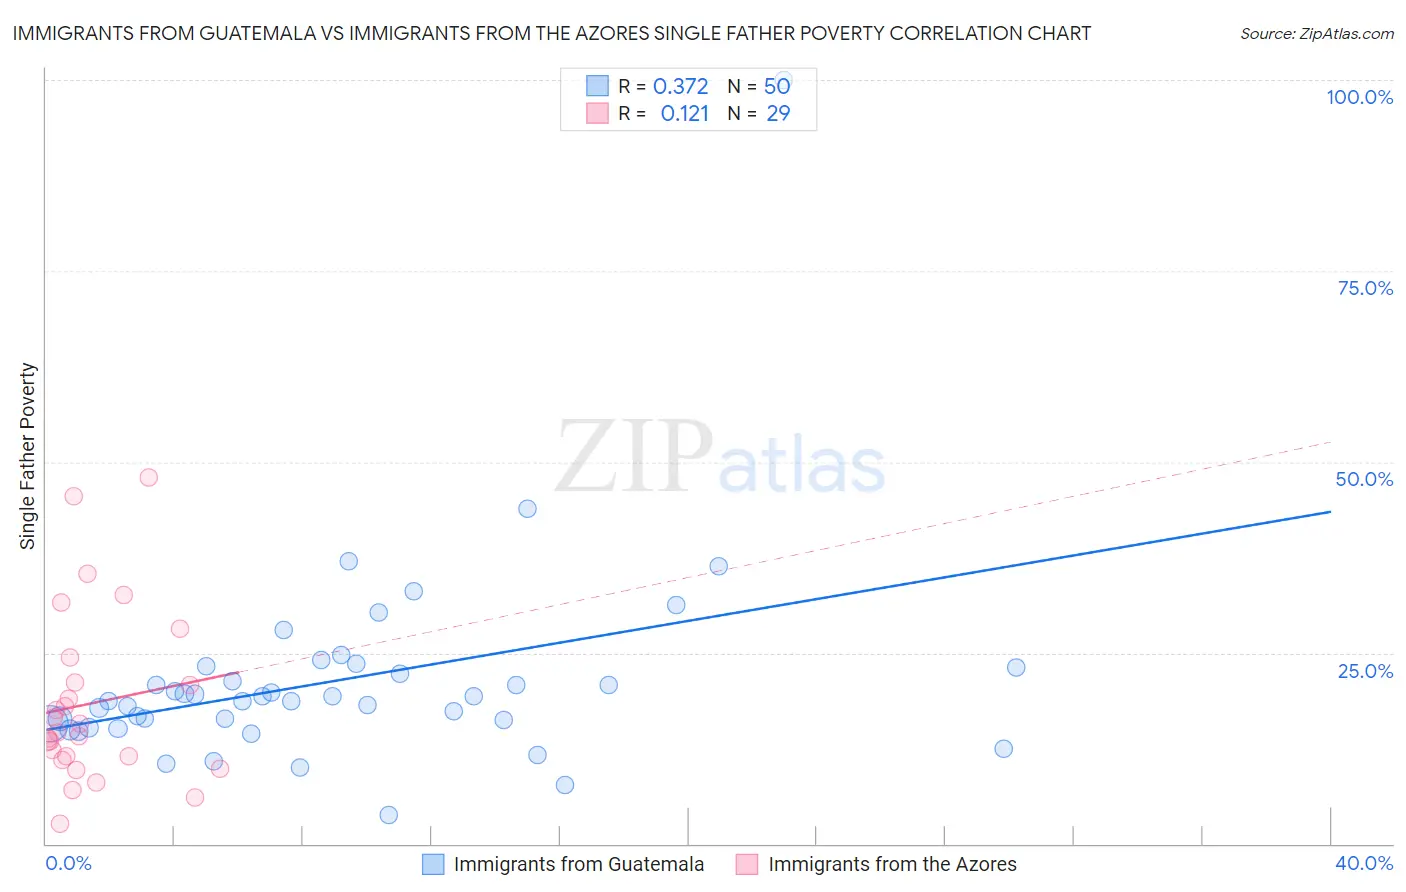 Immigrants from Guatemala vs Immigrants from the Azores Single Father Poverty